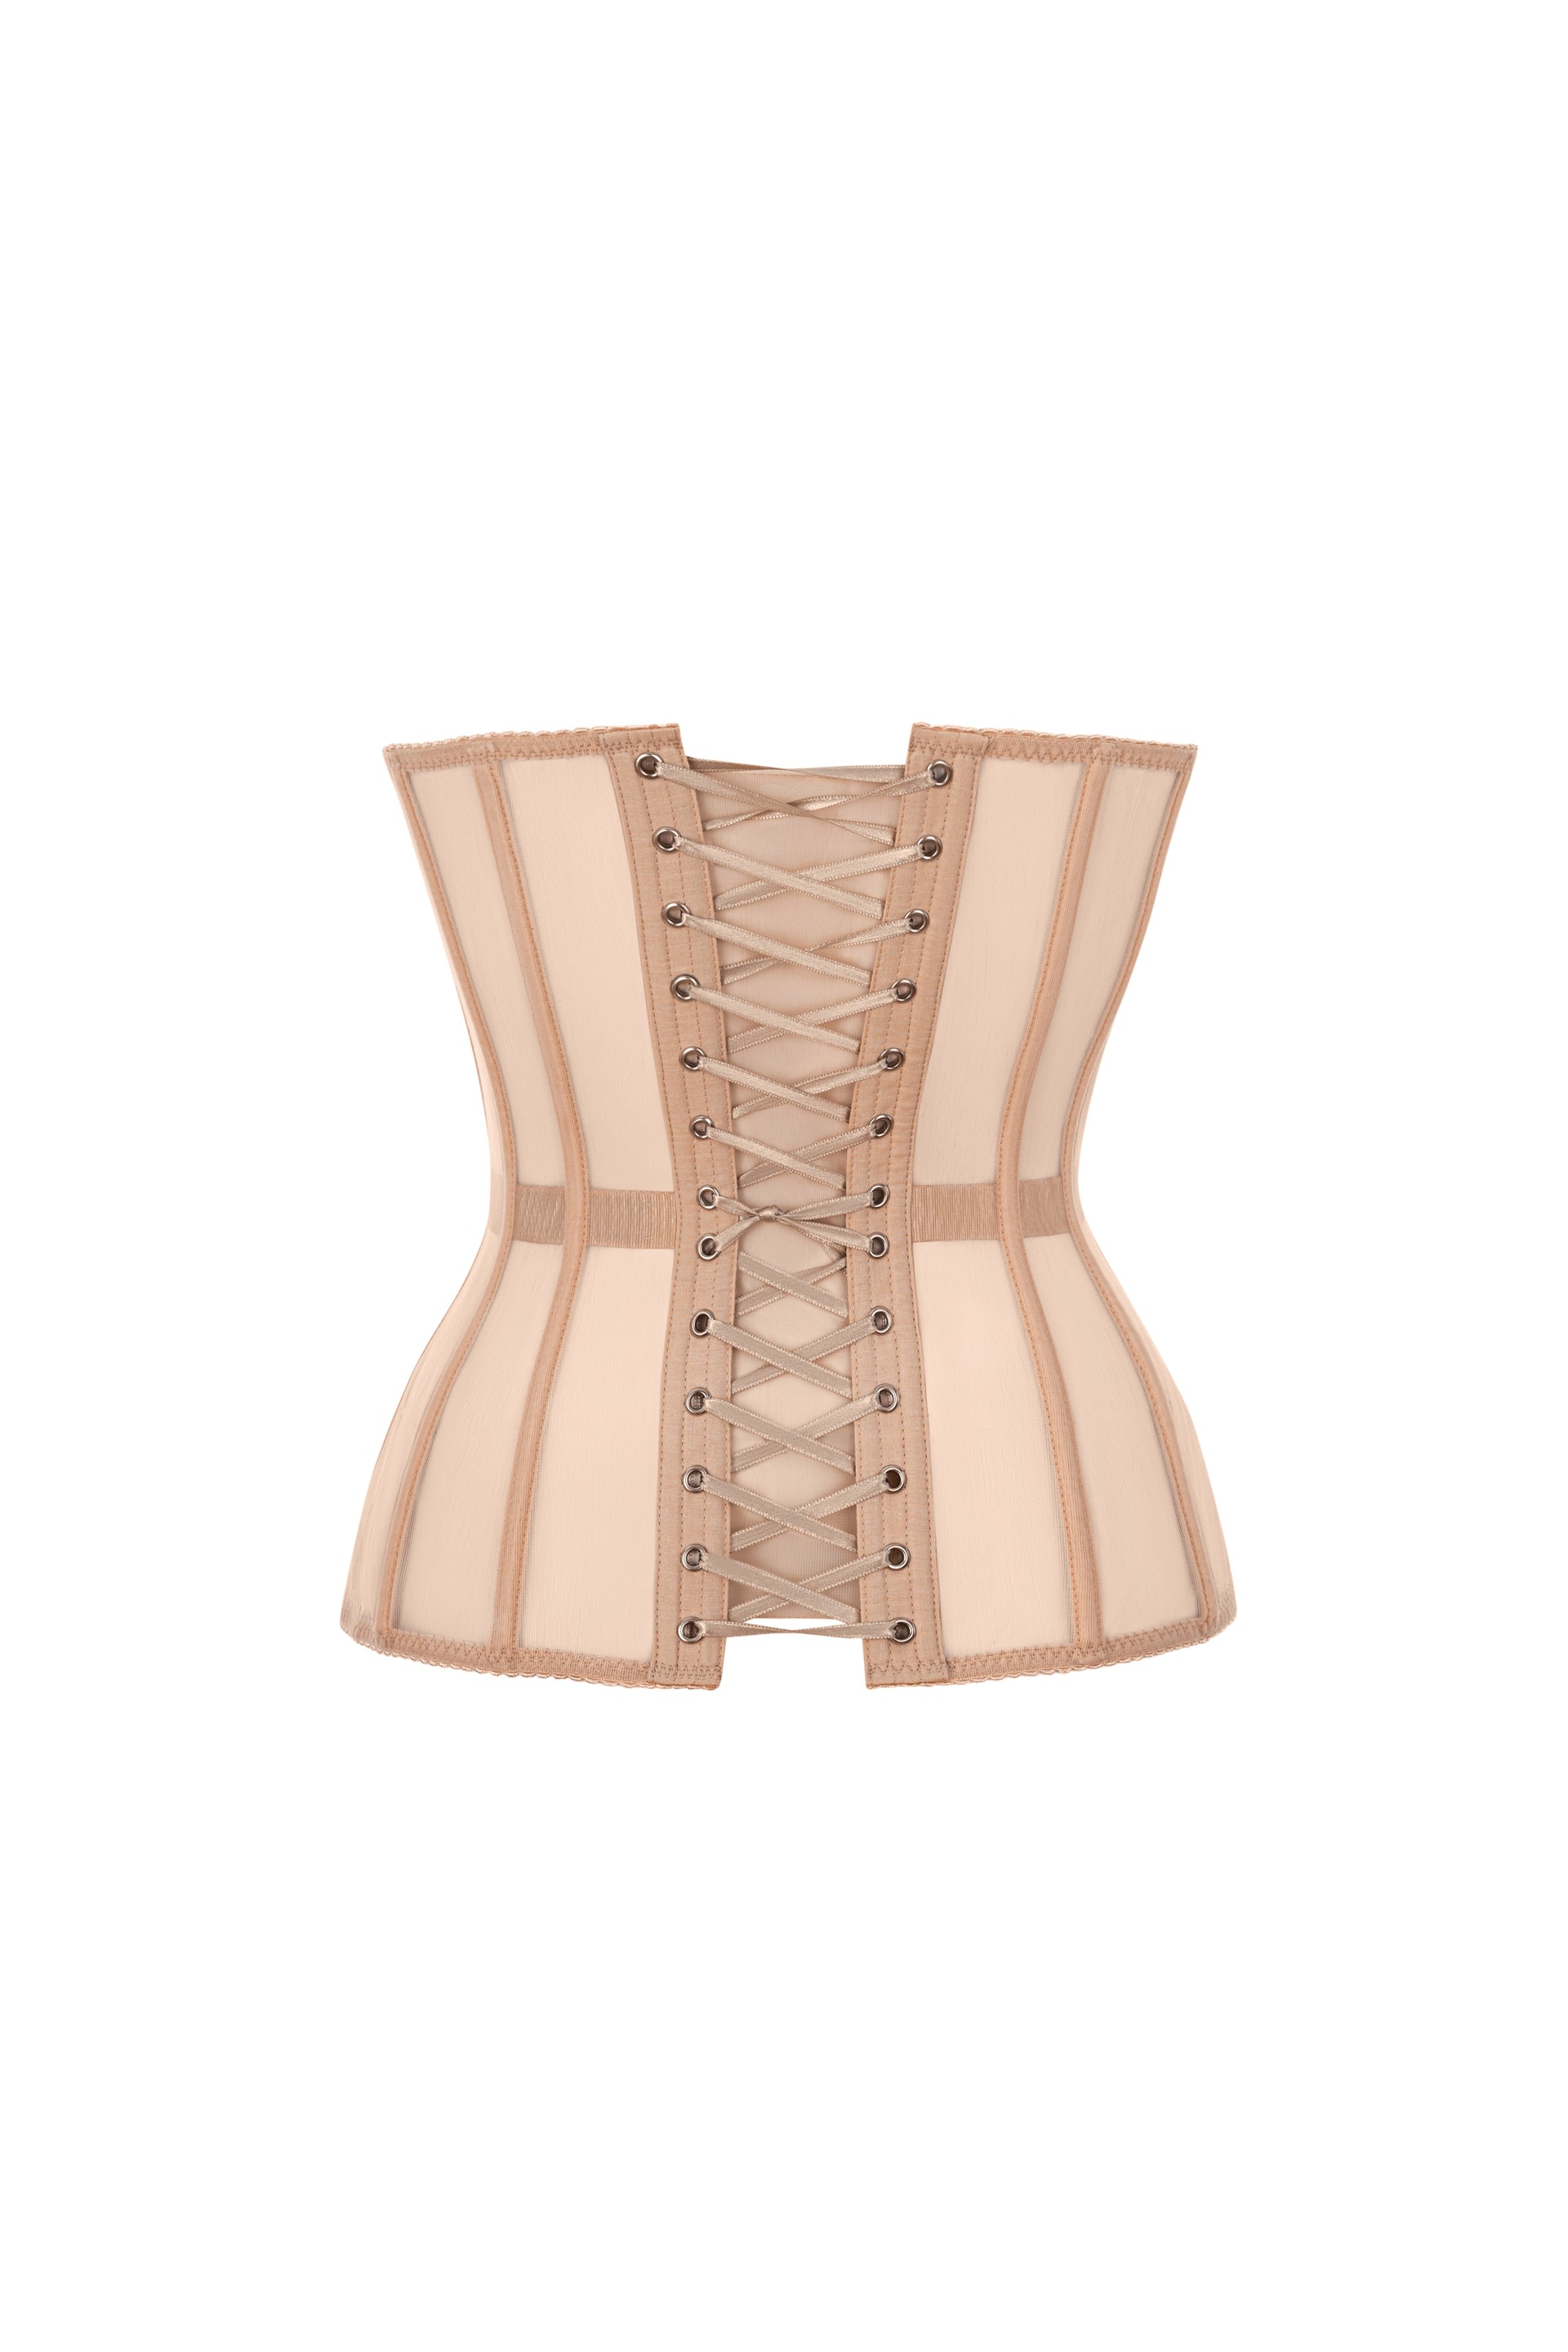 Beige corset without cups - STATNAIA